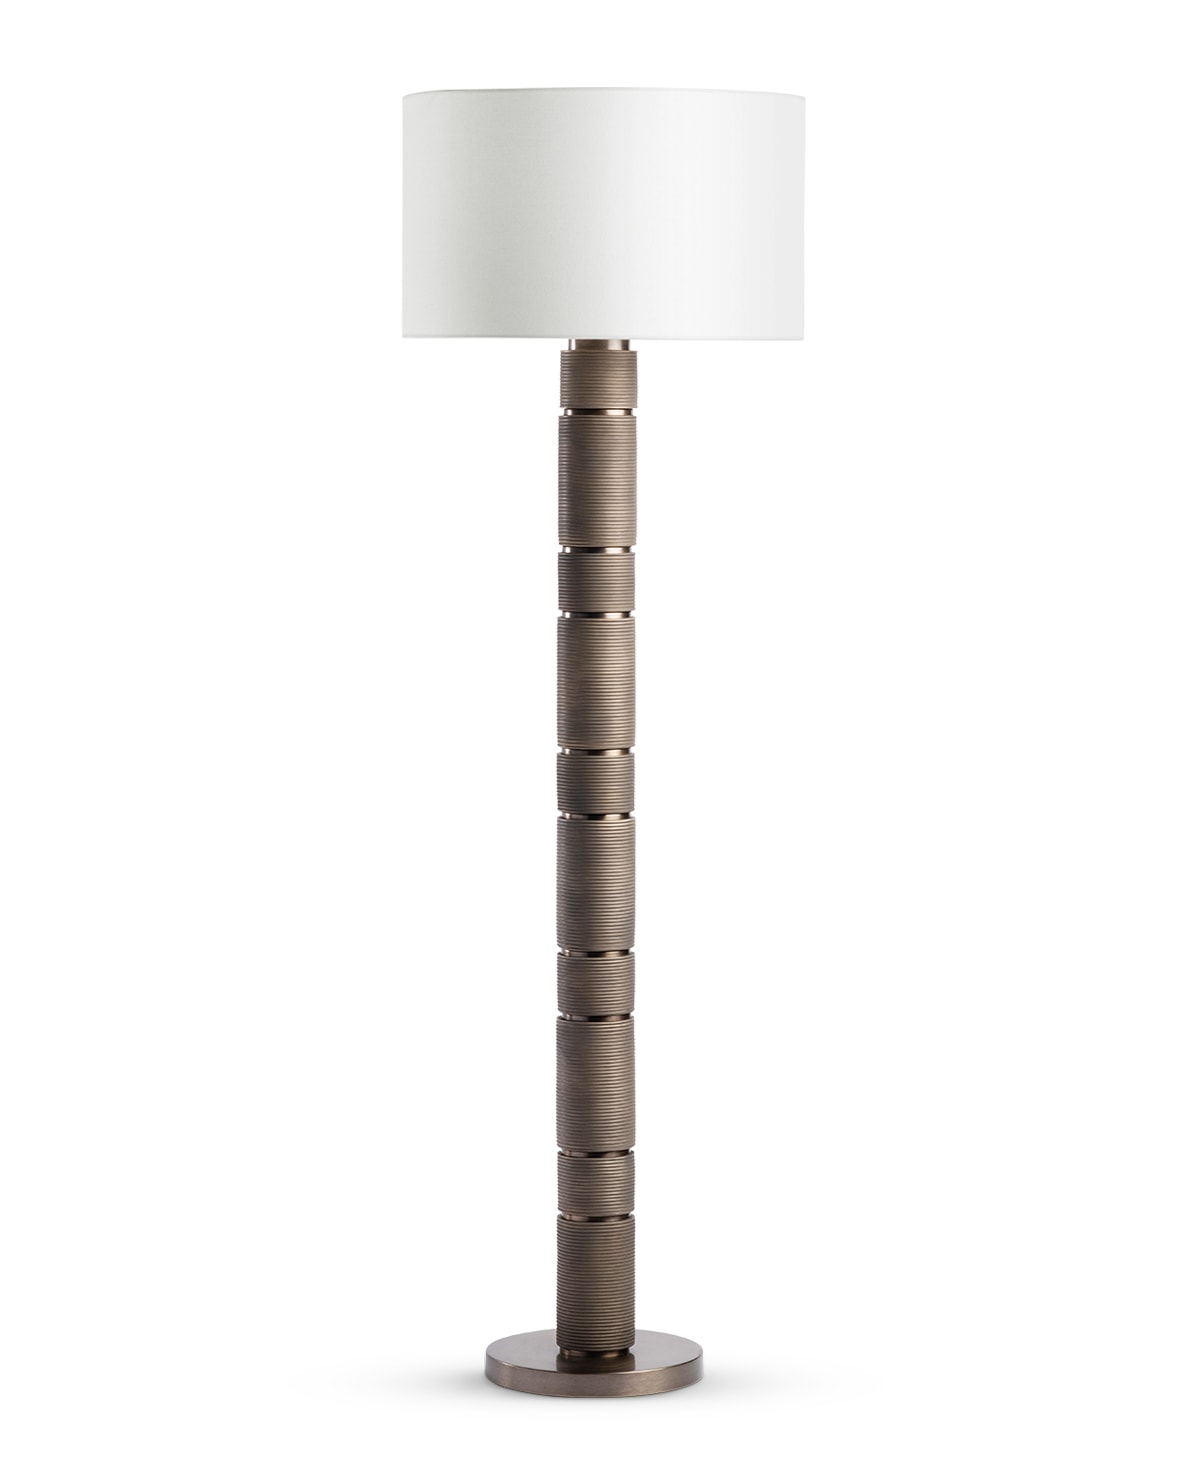 FlowDecor Melvin Floor Lamp in resin with bronze finish and finely ribbed surface and off-white linen drum shade (# 4625)